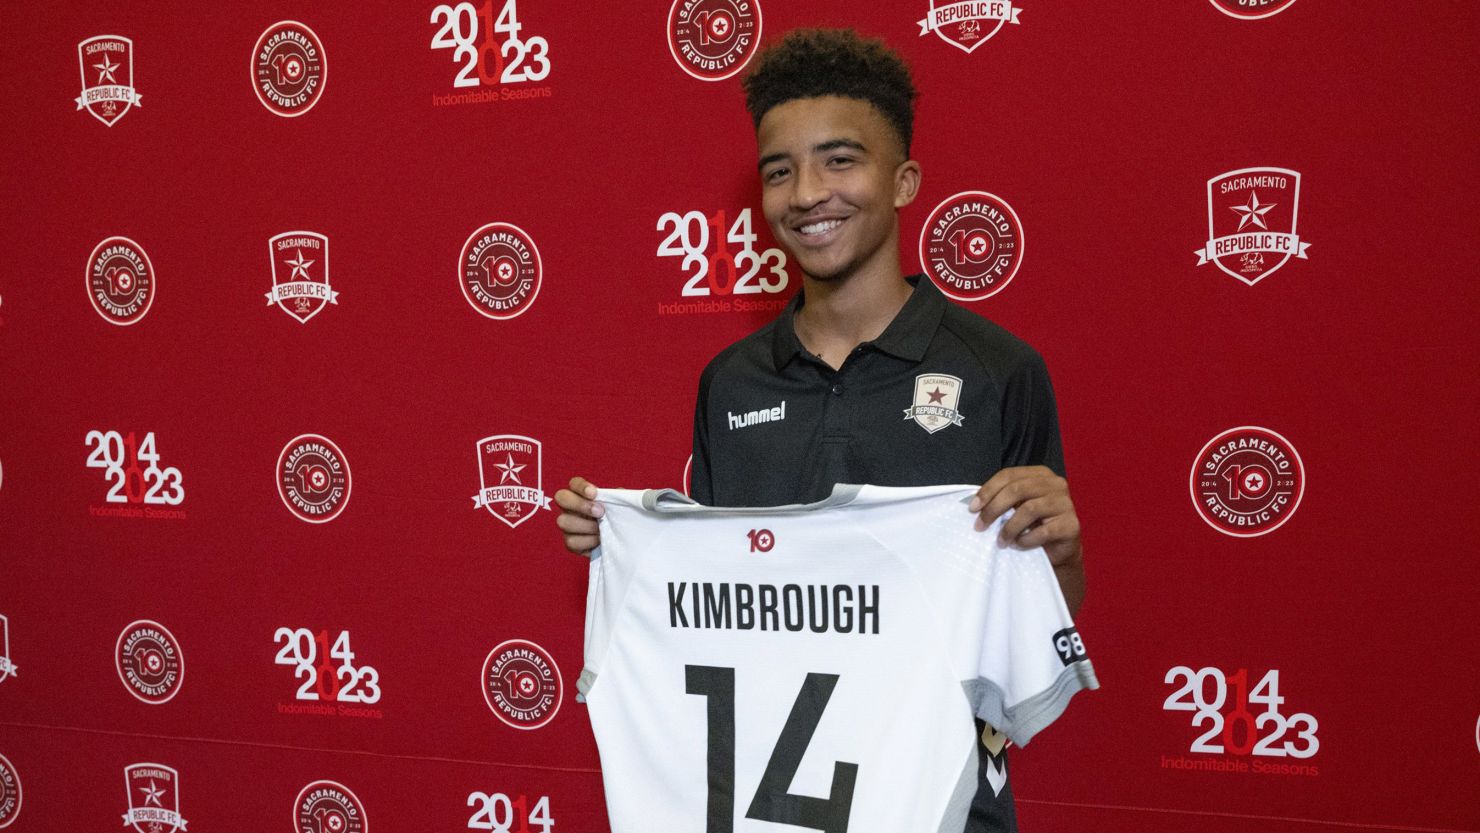 Da'vian Kimbrough, 13, holds up his jersey after signing contract with the Sacramento Republic of the second-tier League Championship of the United Soccer League, Tuesday, Aug. 8, 2023,  in Sacramento, Calif. (Paul Kitagaki Jr./The Sacramento Bee via AP)